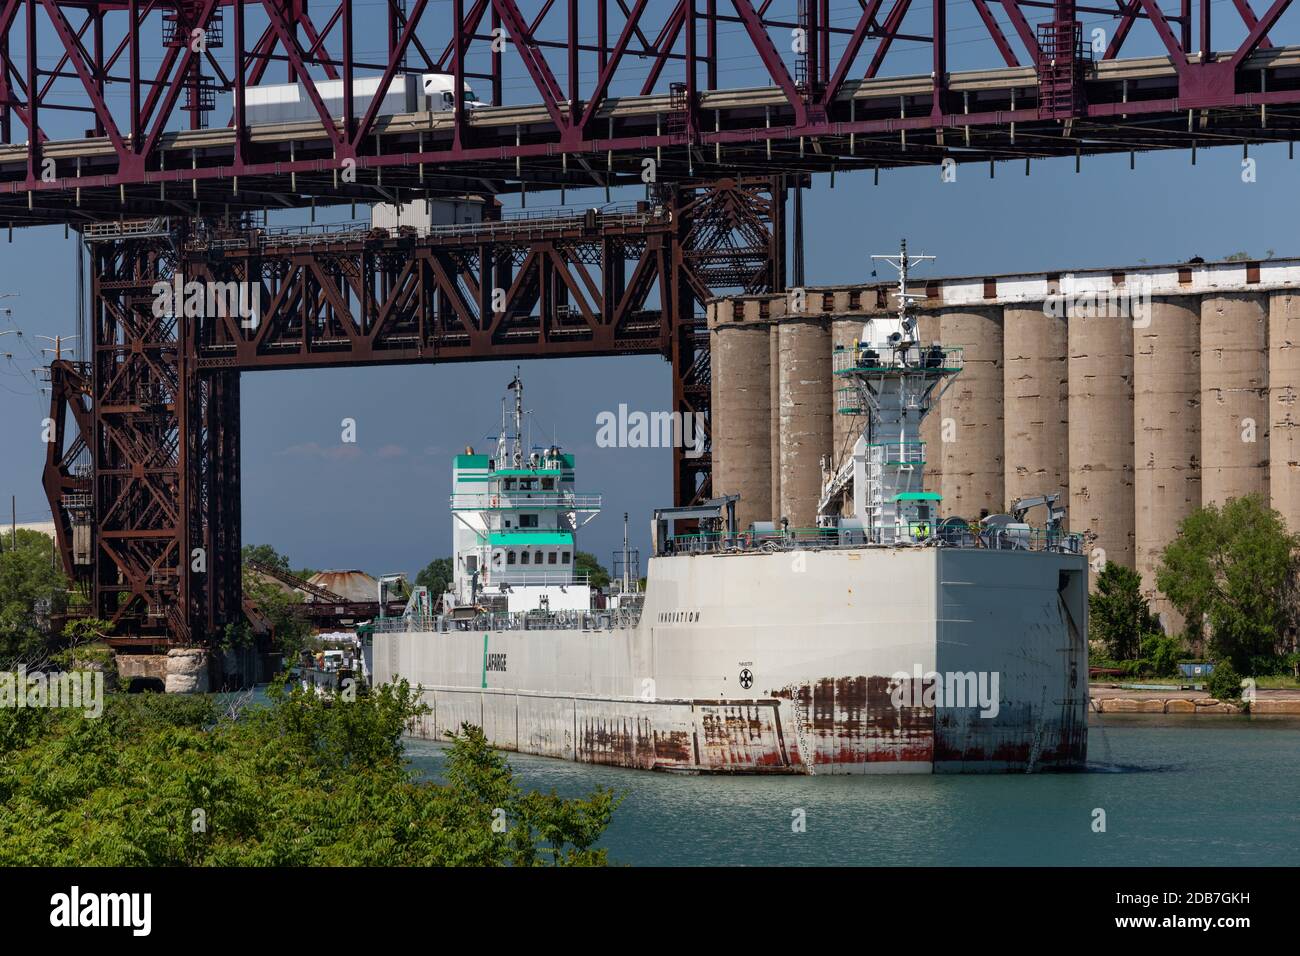 Cement carrier of Lafarge company making her way on the Calumet River in Chicago towards the company's cement plant near 130th Street. Stock Photo